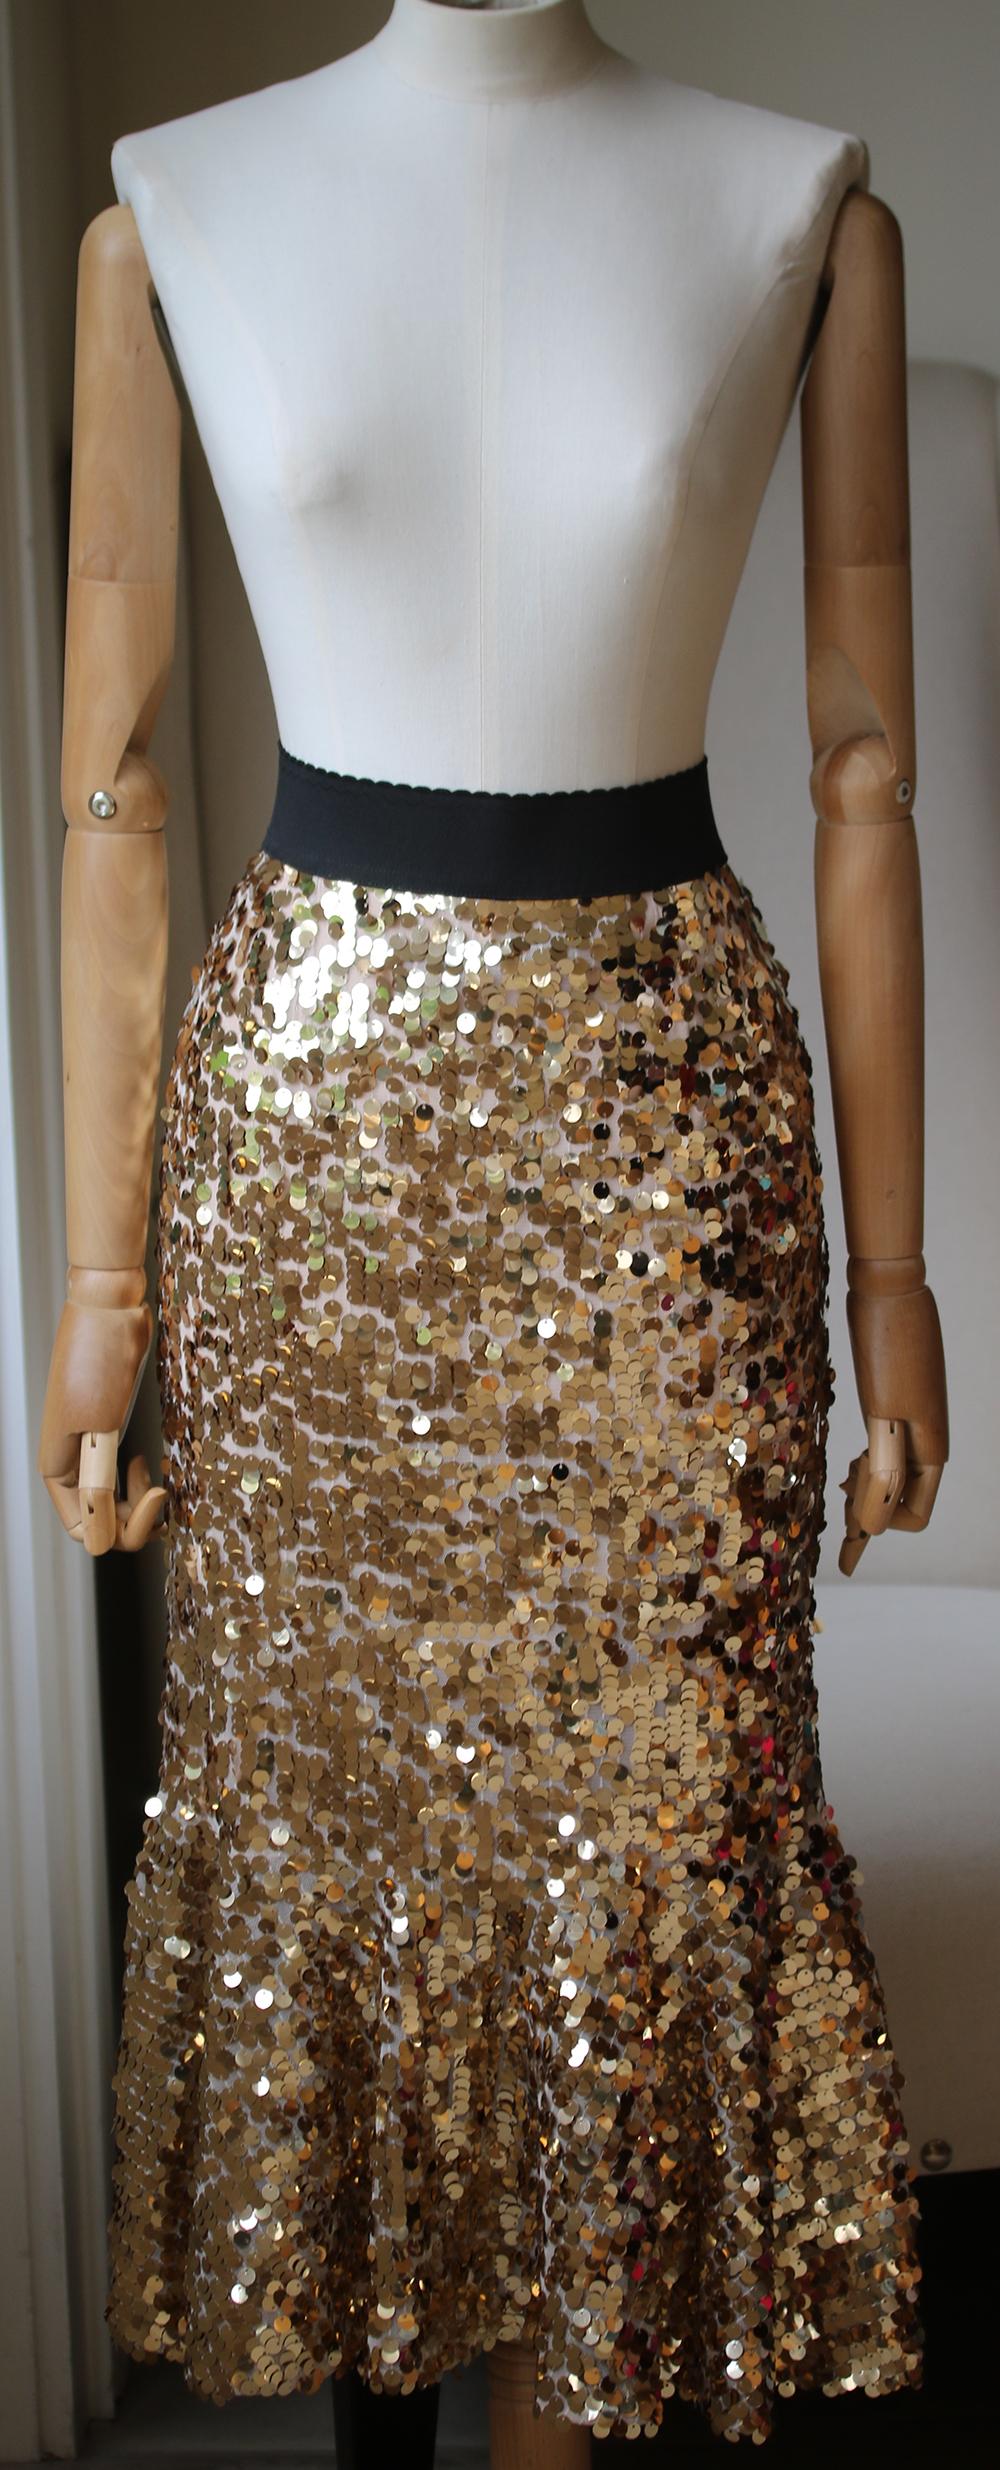 Dolce & Gabbana's skirt has been crafted in Italy from mid-weight gold tulle, enriched with scores of glistening sequins - a brand signature. Detailed with a black elasticated band to create definition at the waist, it's finished with a gently